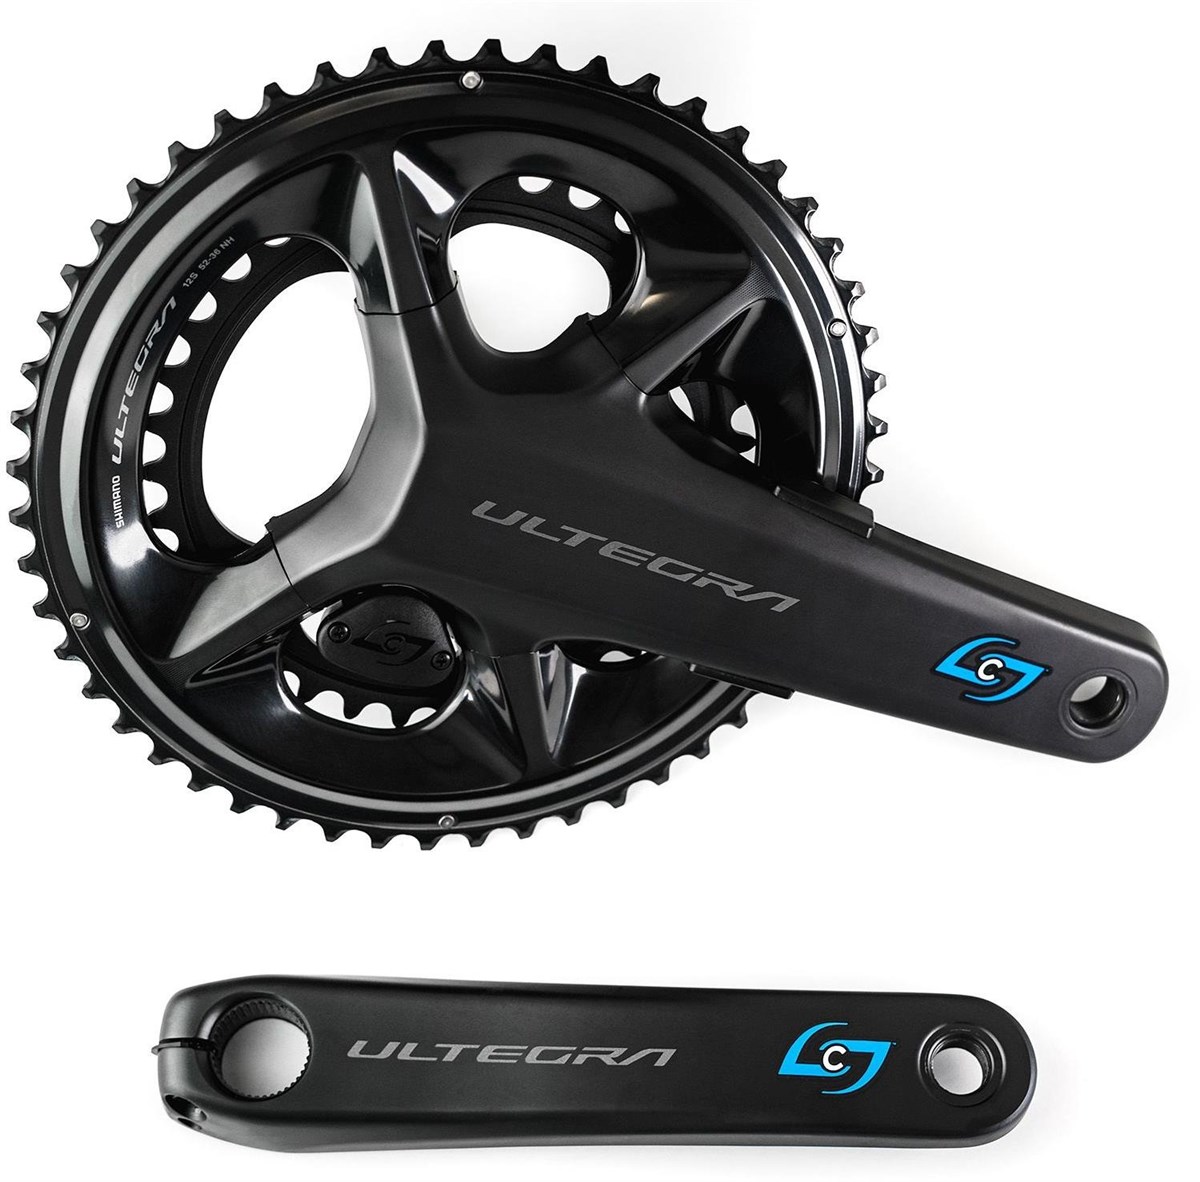 Stages Cycling Stages Power G3 Ultegra R8100 - Pair product image